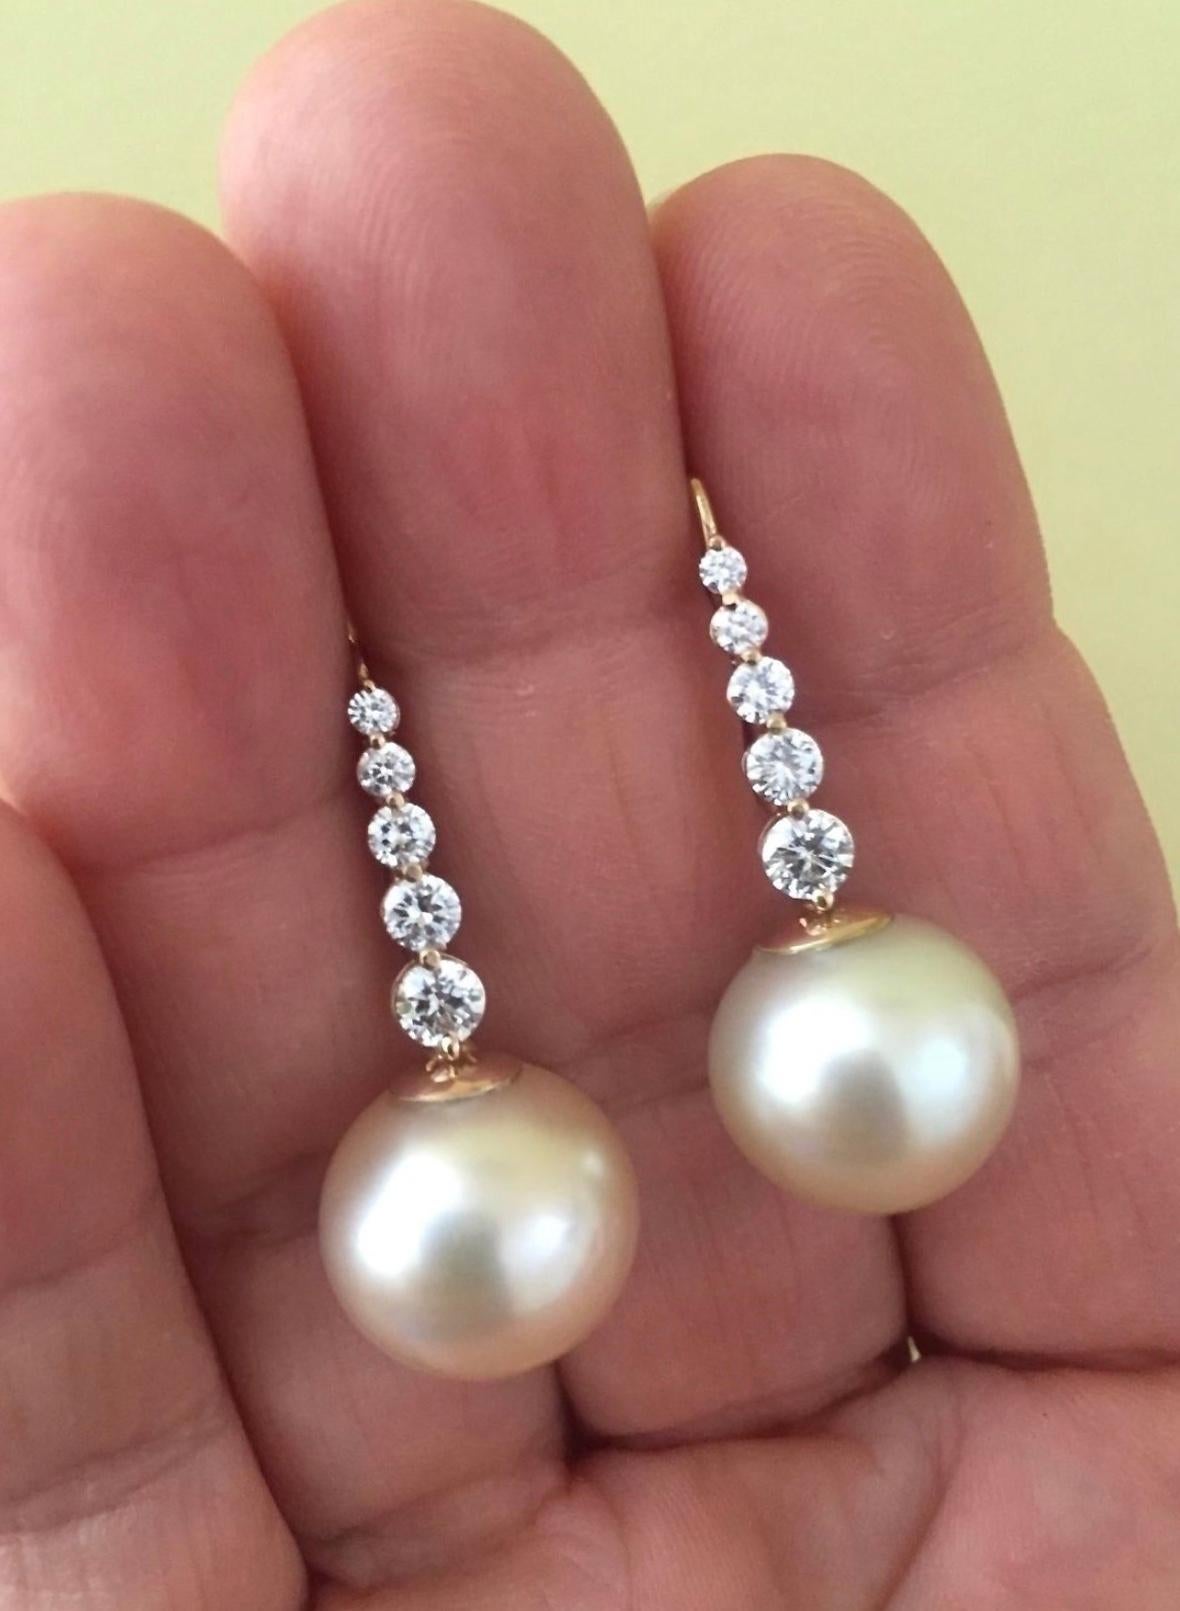 These Beautiful Estate Cultivate Natural South Sea Pearls Diamond Earrings Feature:
South Sea Pearl Shape : Almost Round
Average Color/Surface : Light Golden-Cream/ Some Natural Flaws(see photos)
Nacre: Thick
Pearl Measurements : Approx. 14.5mm x